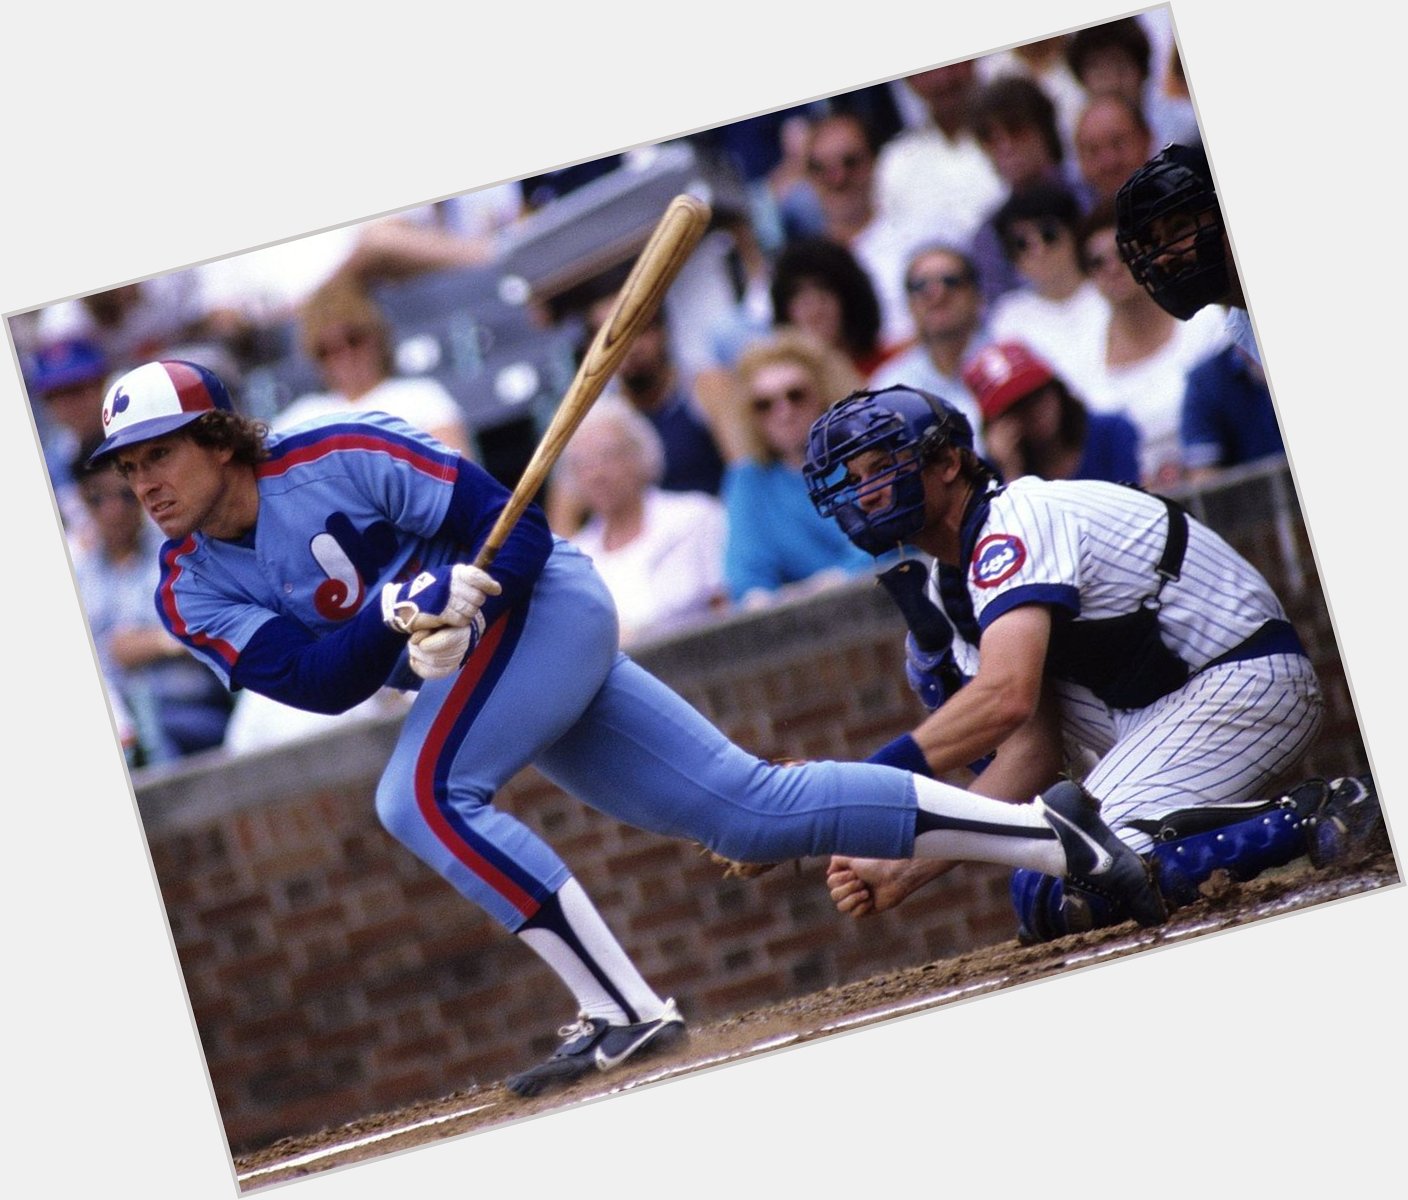 Happy Birthday to Gary Carter, who would have turned 63 today! 